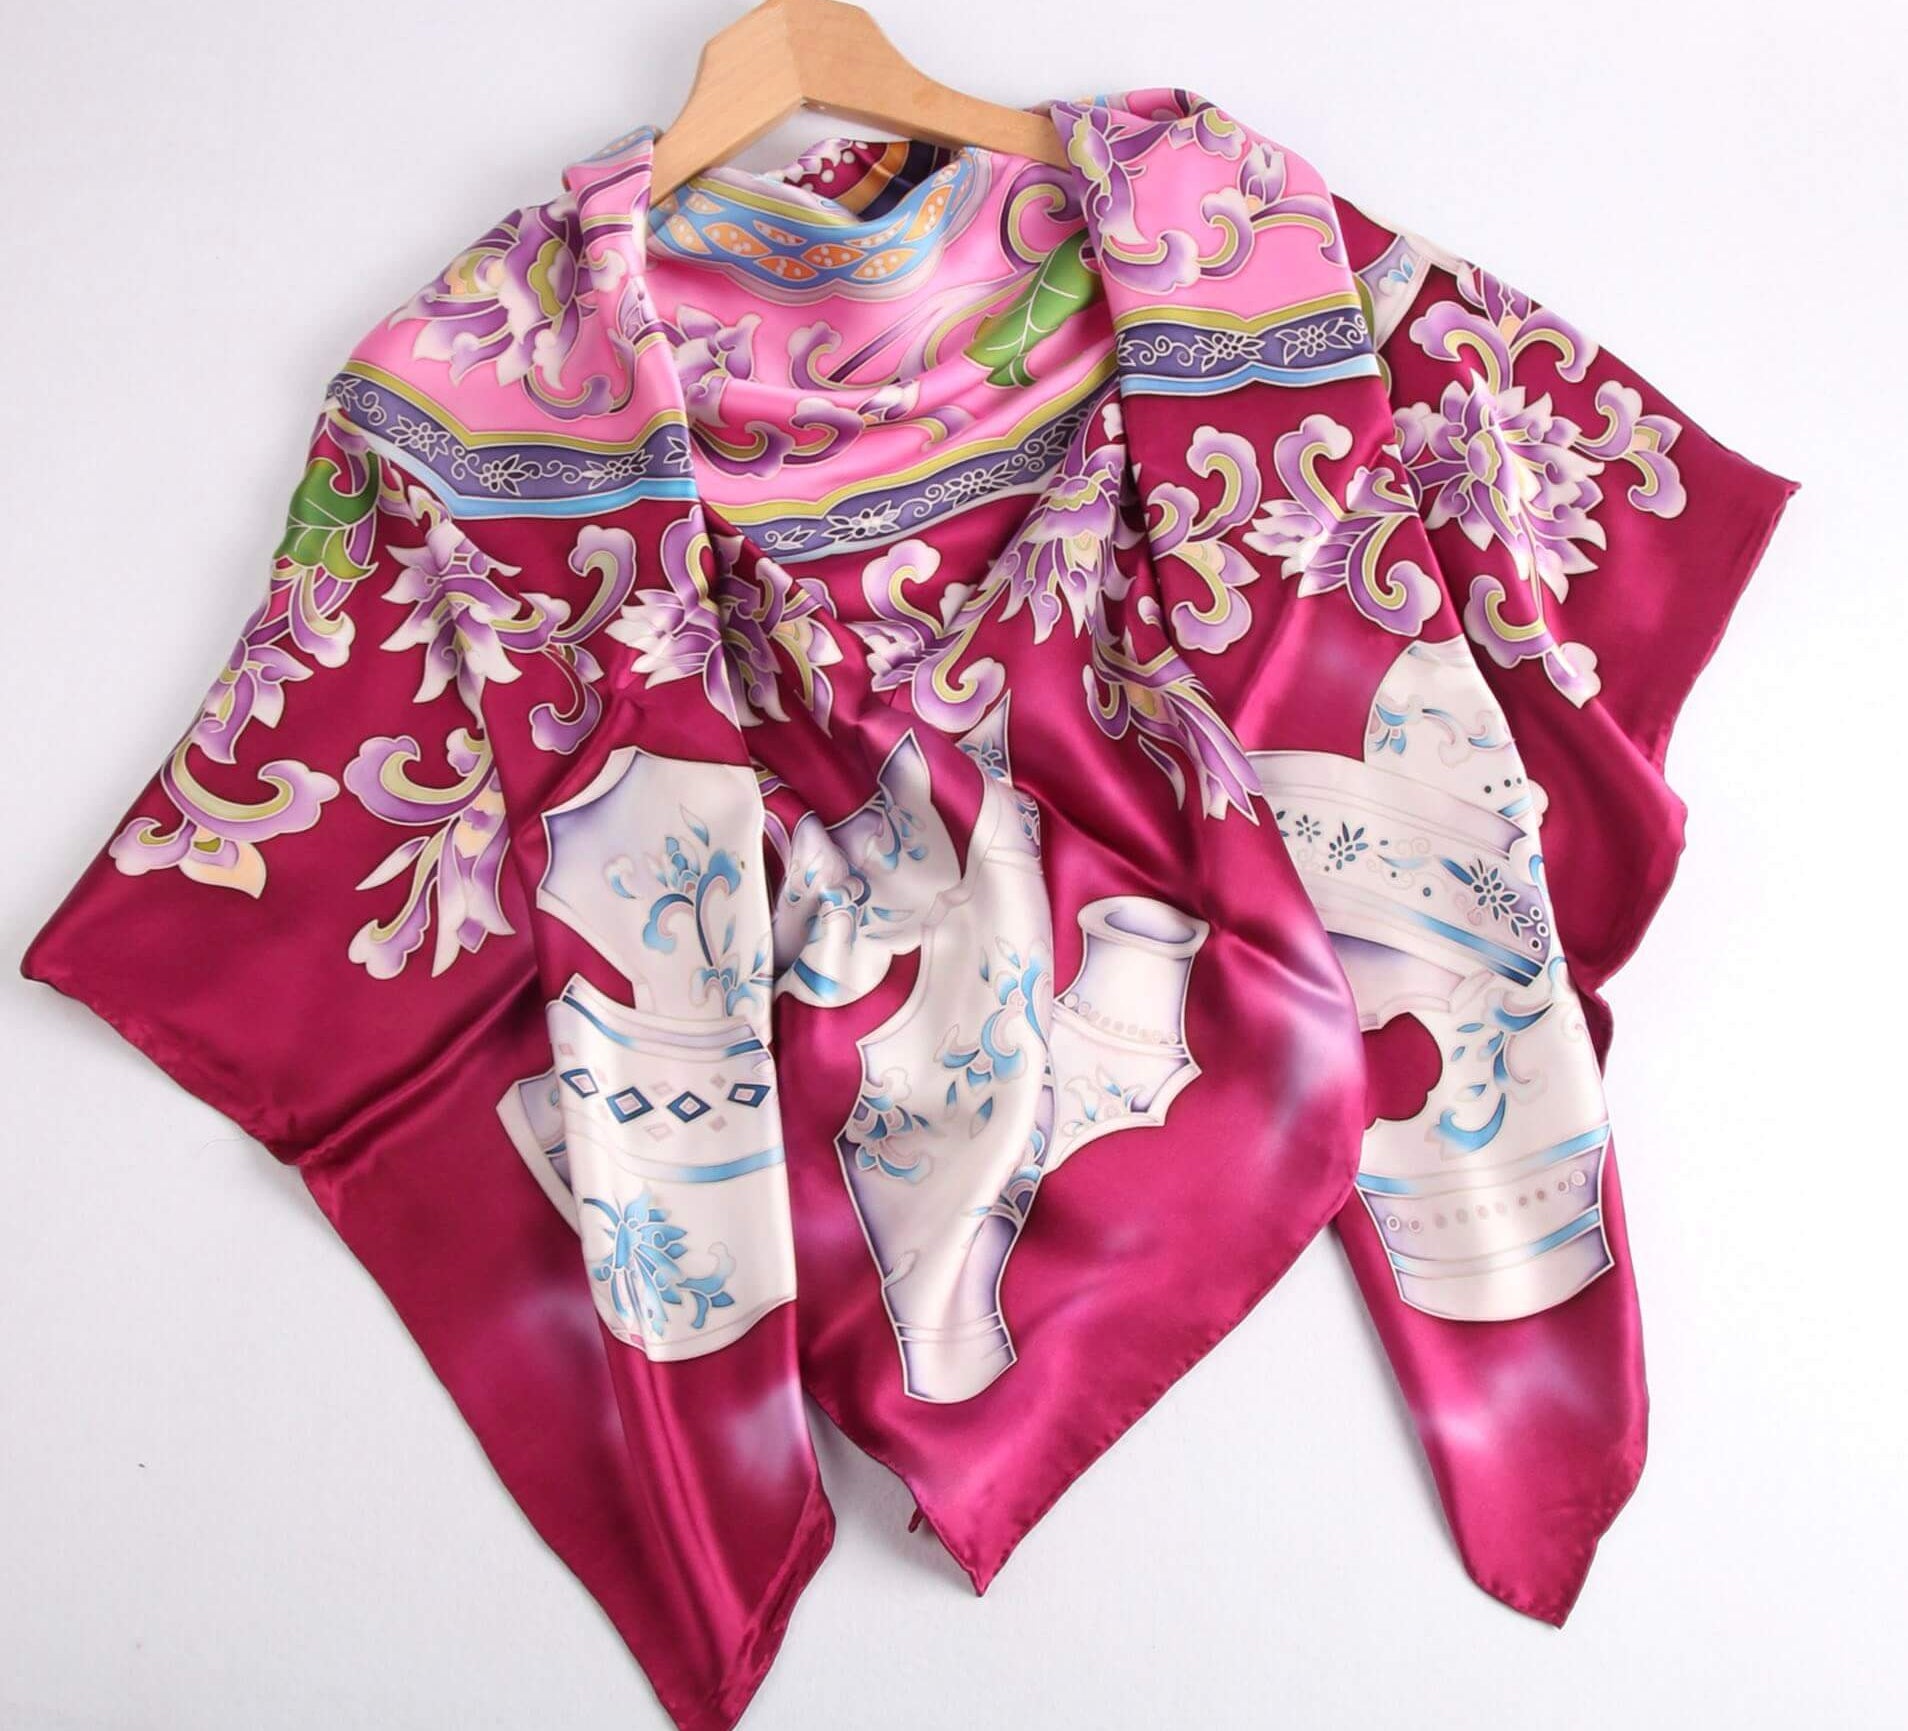 Limited Edition Hand Painted Silk Scarf Pink - Vshine Silk and Shine Fashion Accessories